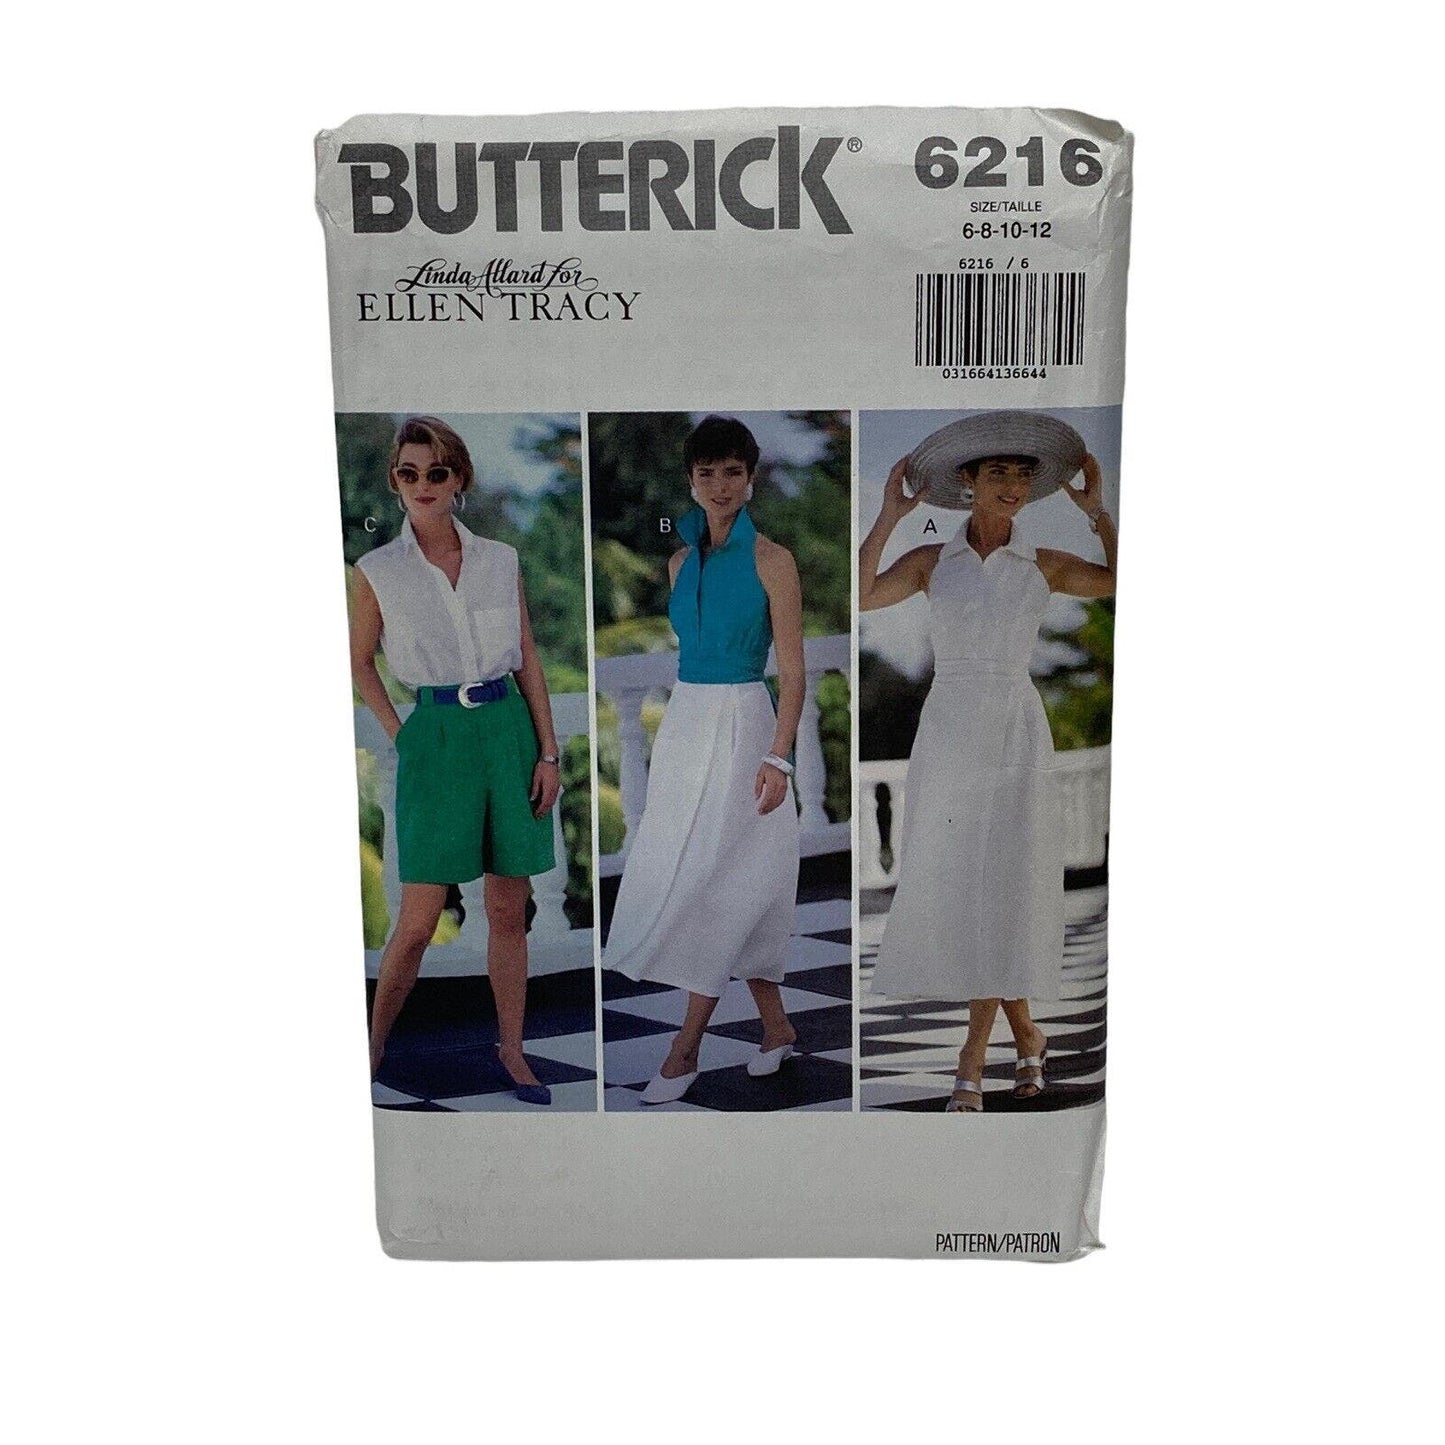 Butterick 6216 Misses Halter Top Wrap Skirt & Shorts Sewing Pattern Size 6-12